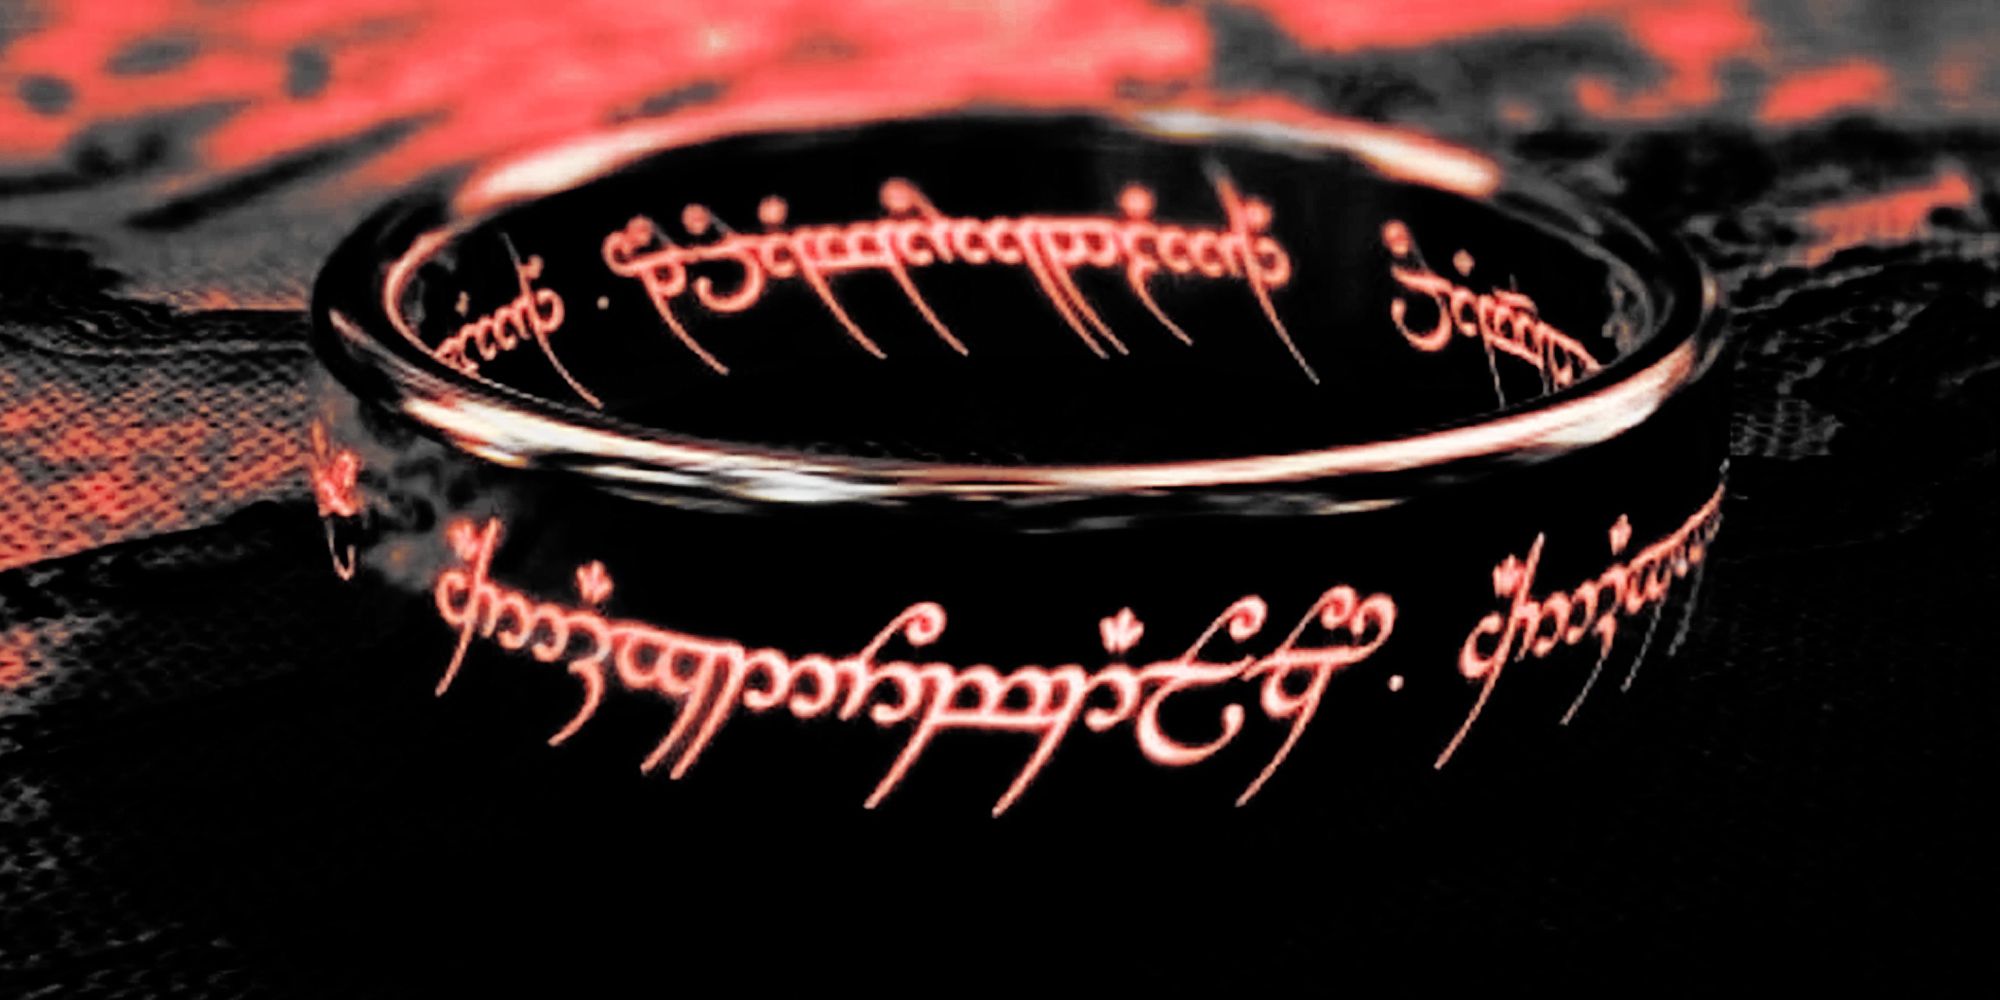 An edited image of the One Ring from The Lord of the Rings so it is red and black